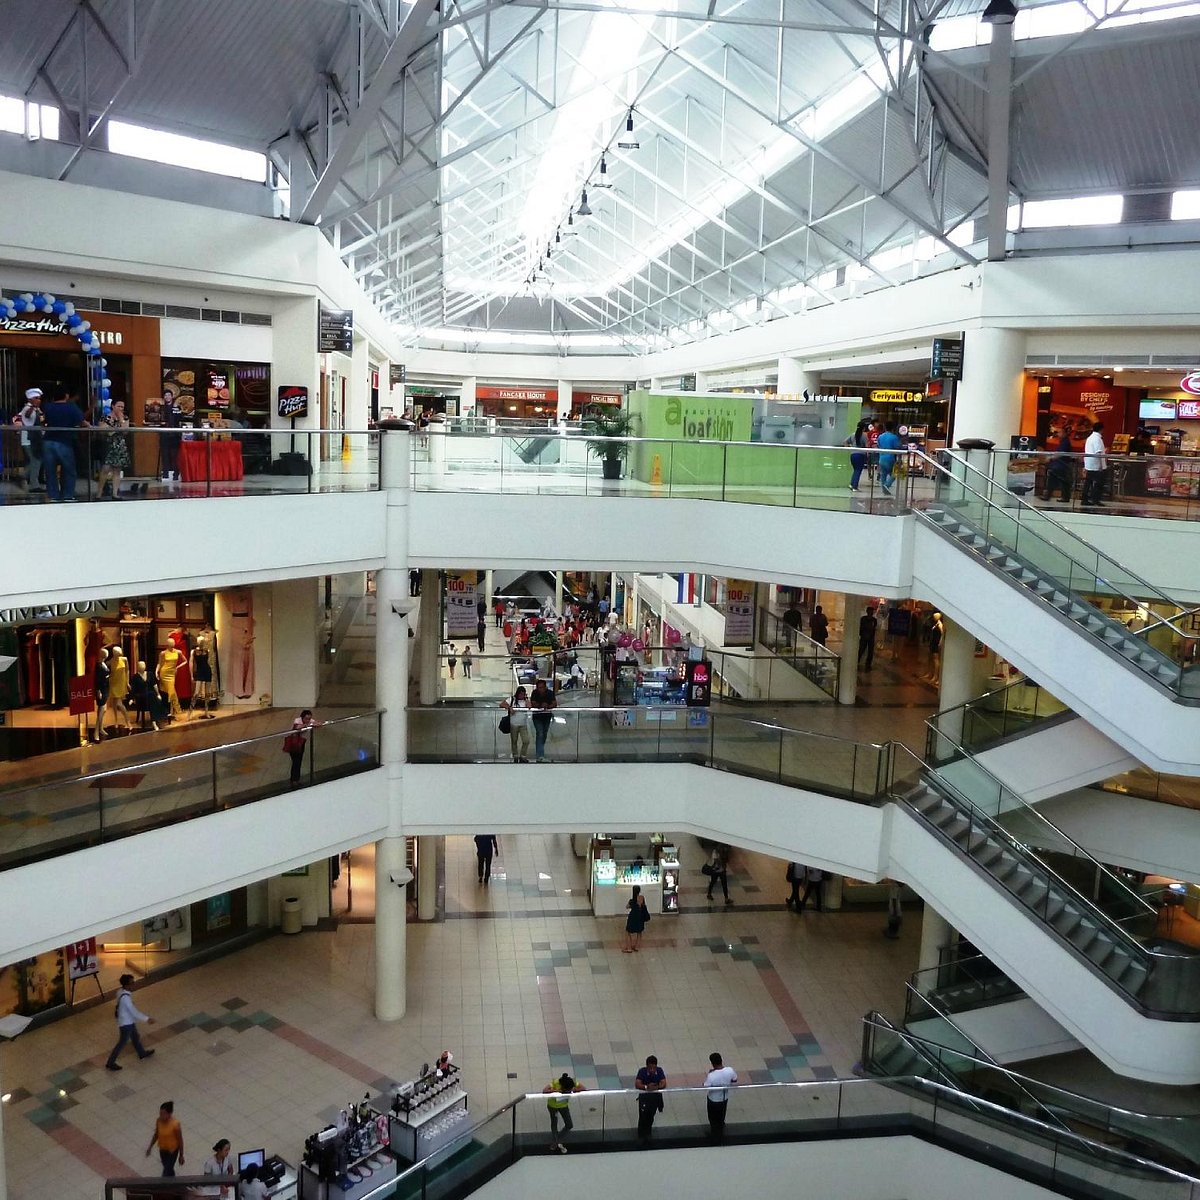 Robinsons Galleria Food Court - Quezon City District 3 - 4 tips